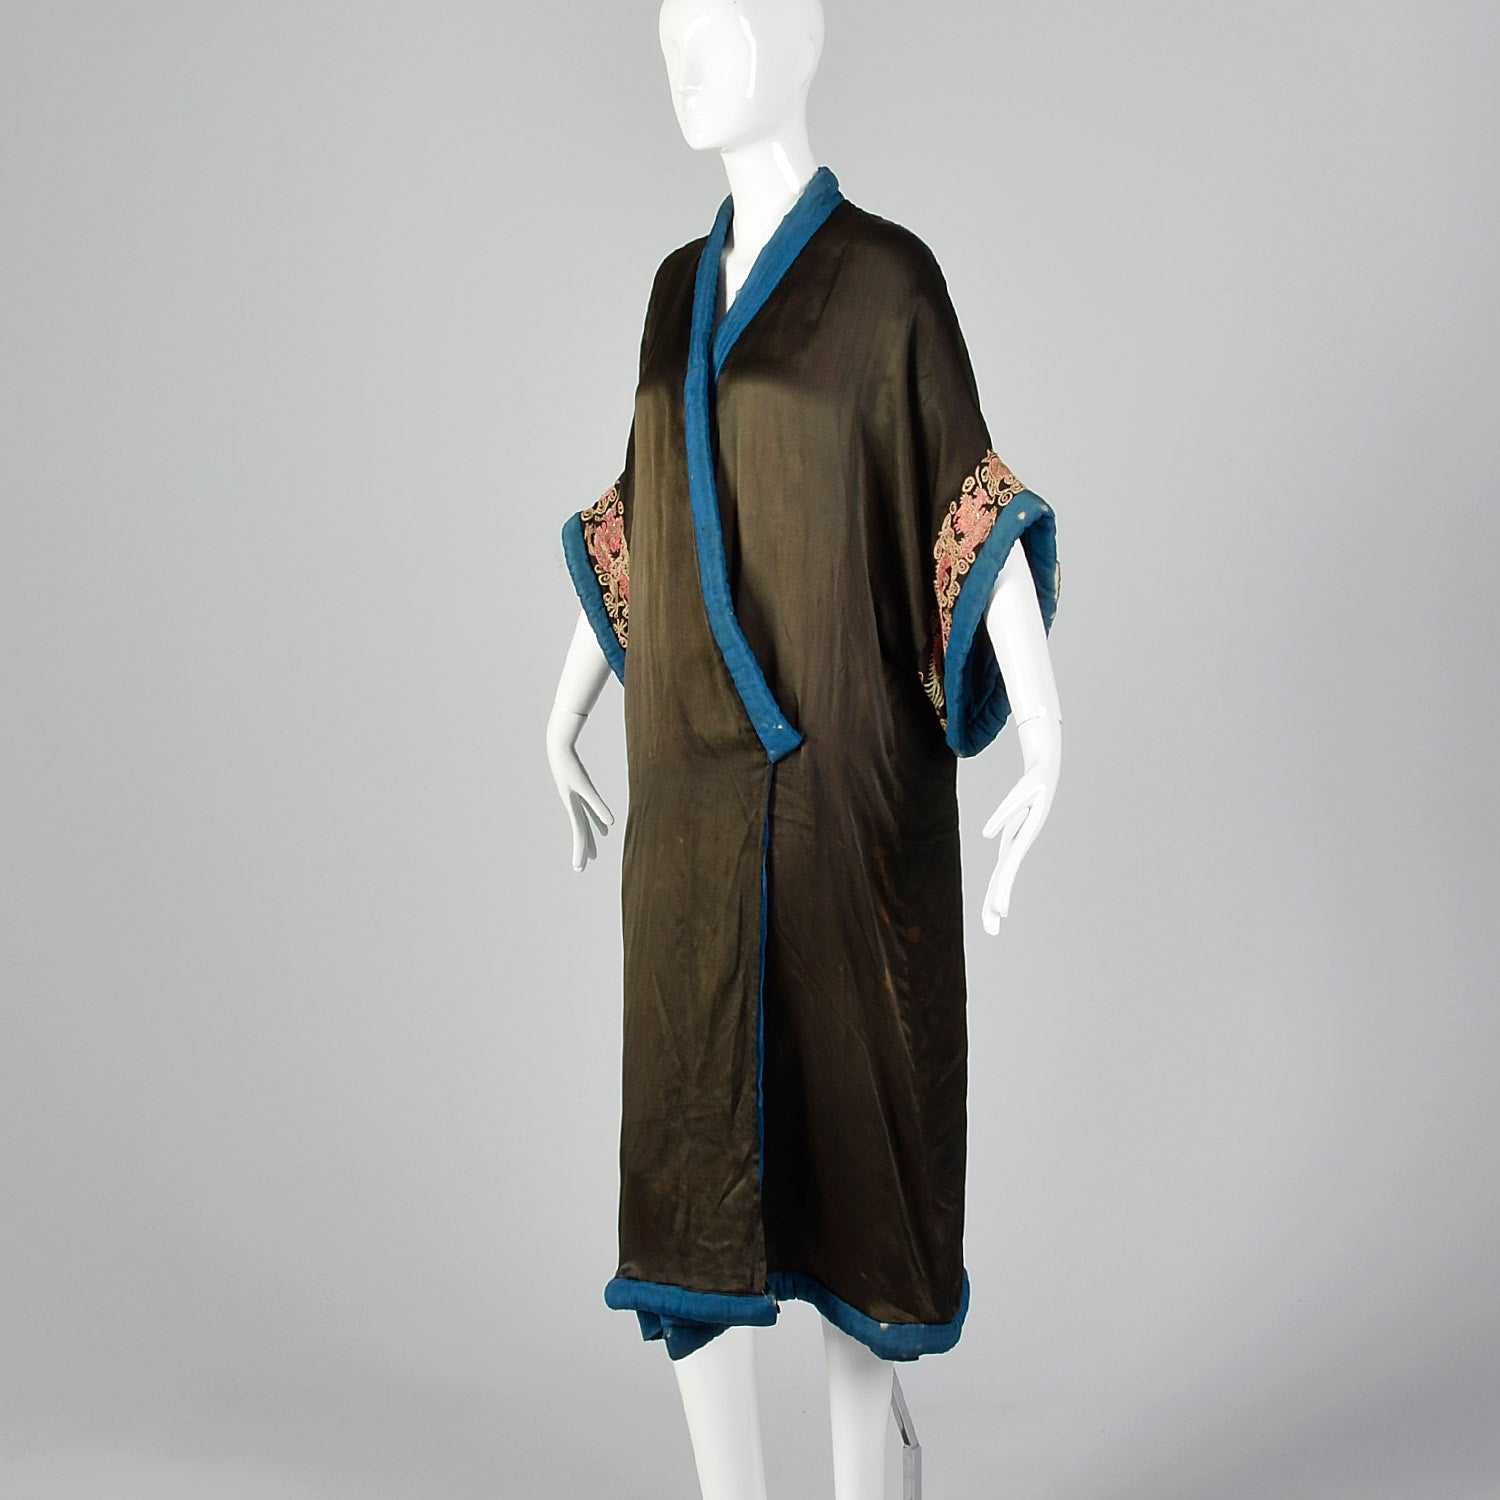 1920s Opera Coat with Embroidered Dragon Sleeves